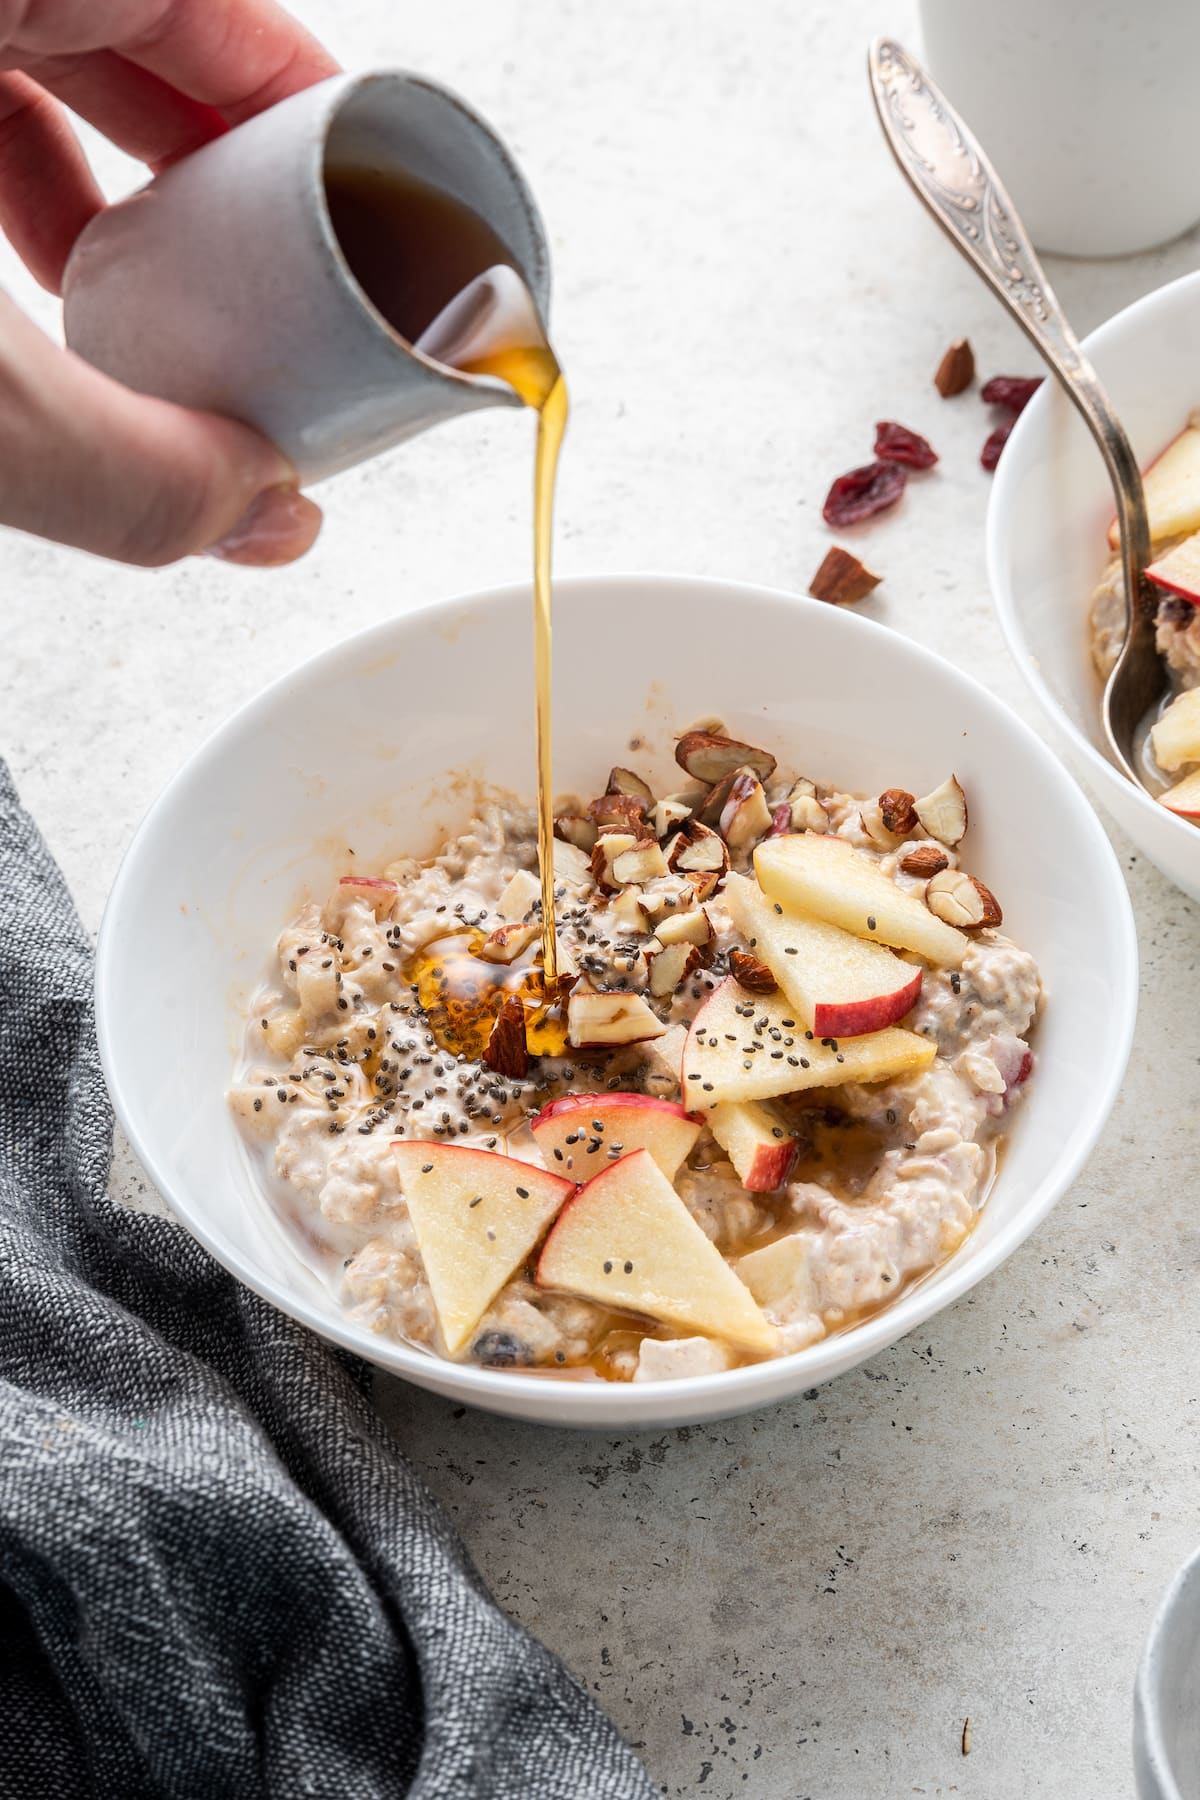 Woman's hand pouring maple syrup over bowl of bircher muesli.